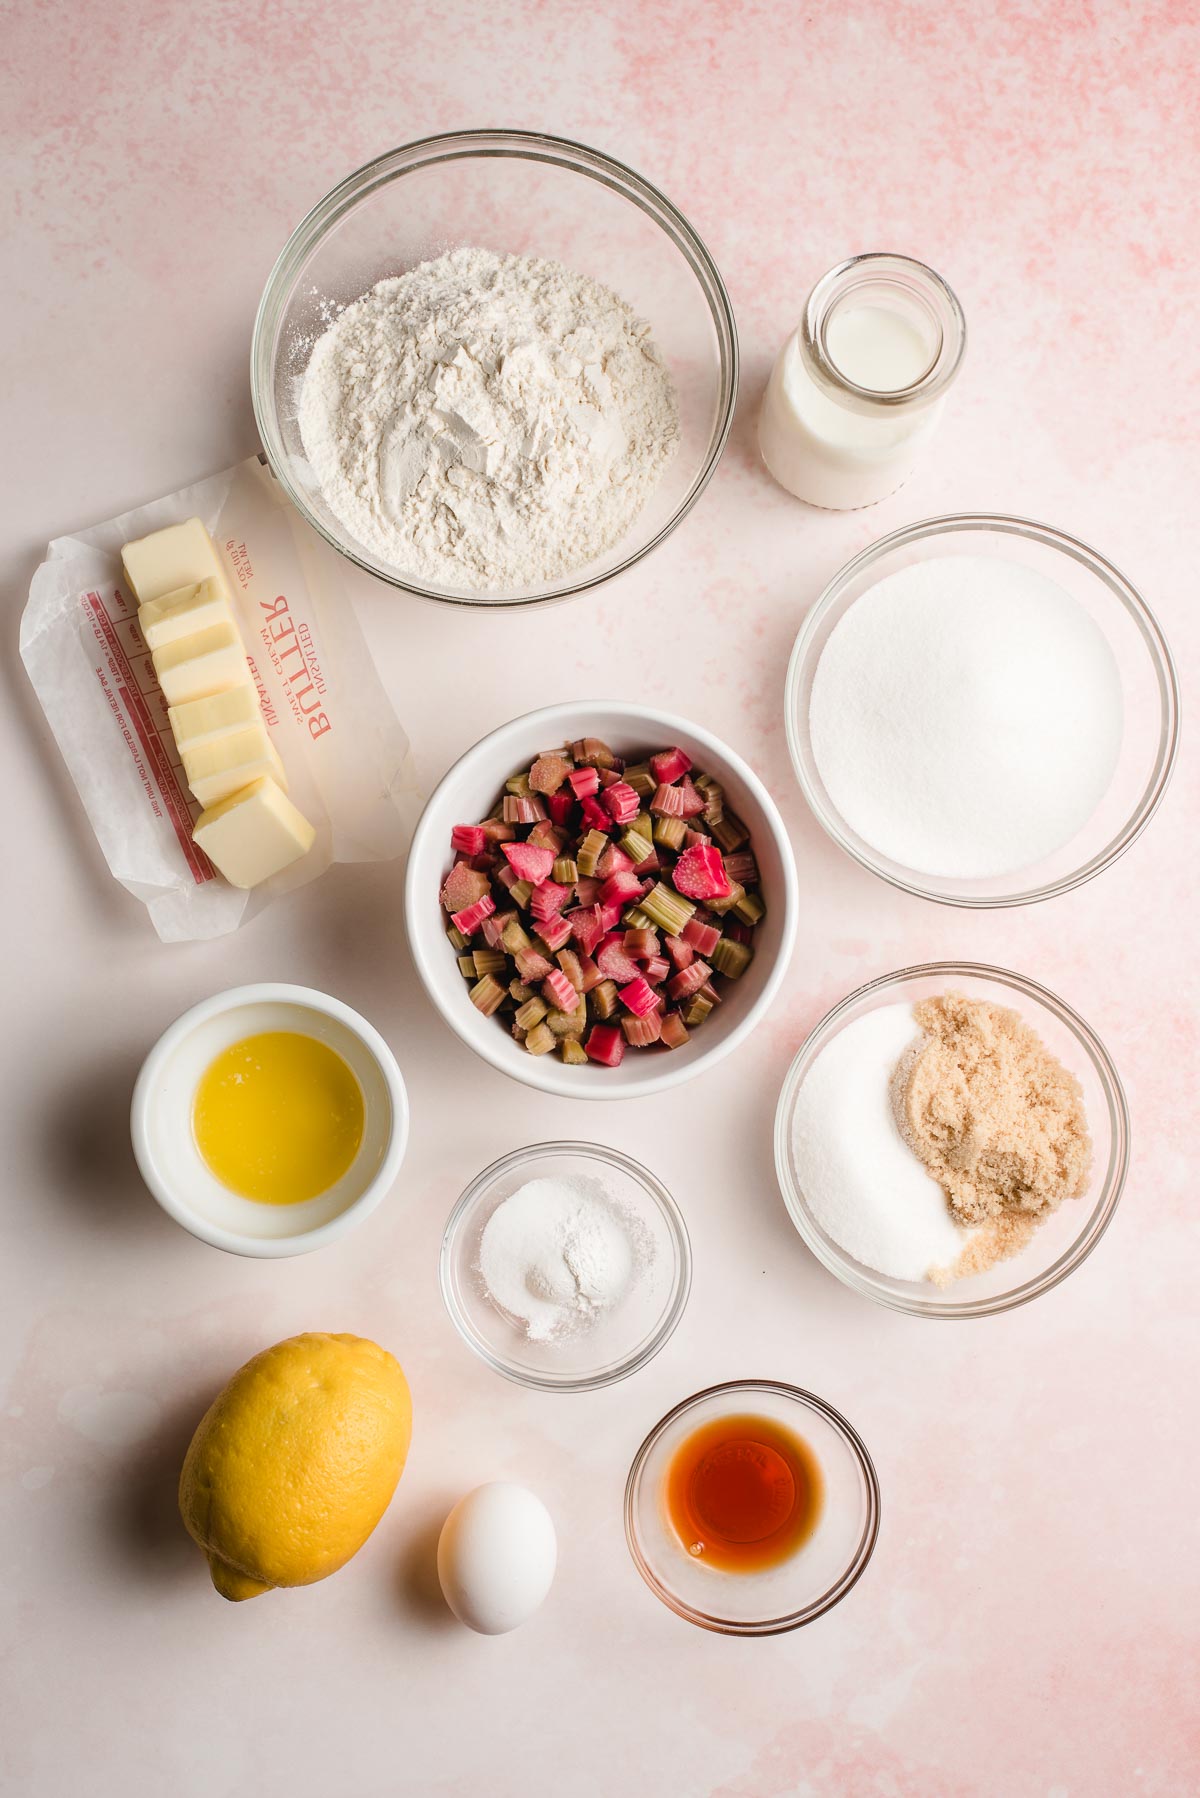 Ingredients for rhubarb cake shown on a pink background.